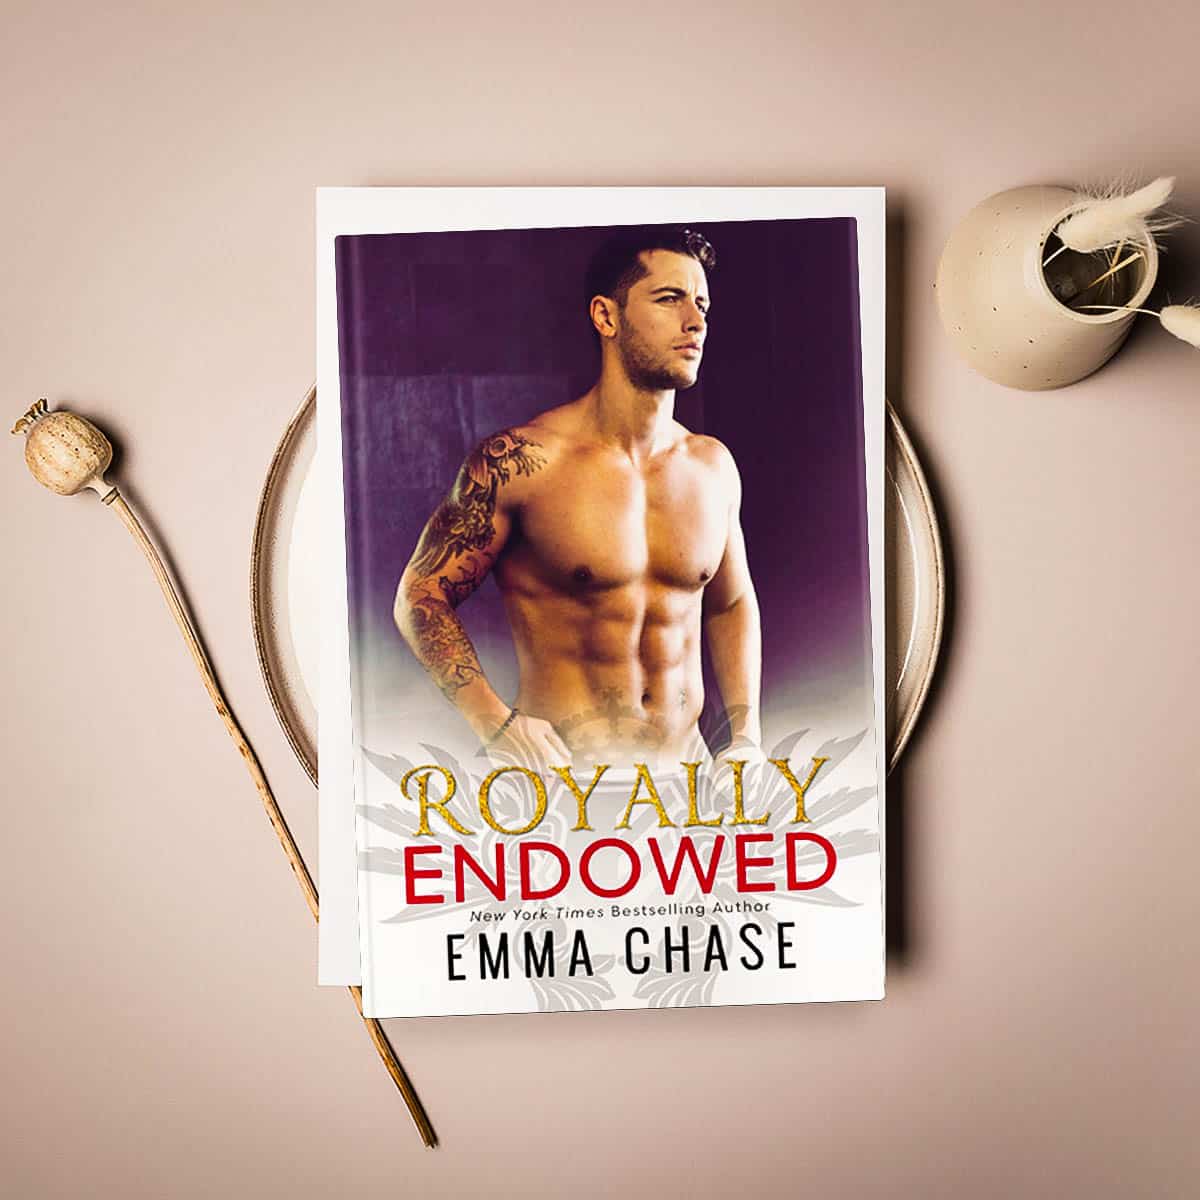 Check out an excerpt from Royally Endowed by Emma Chase, the third book in the Royally series and contemporary romance between a royal bodyguard and his royal-adjacent charge